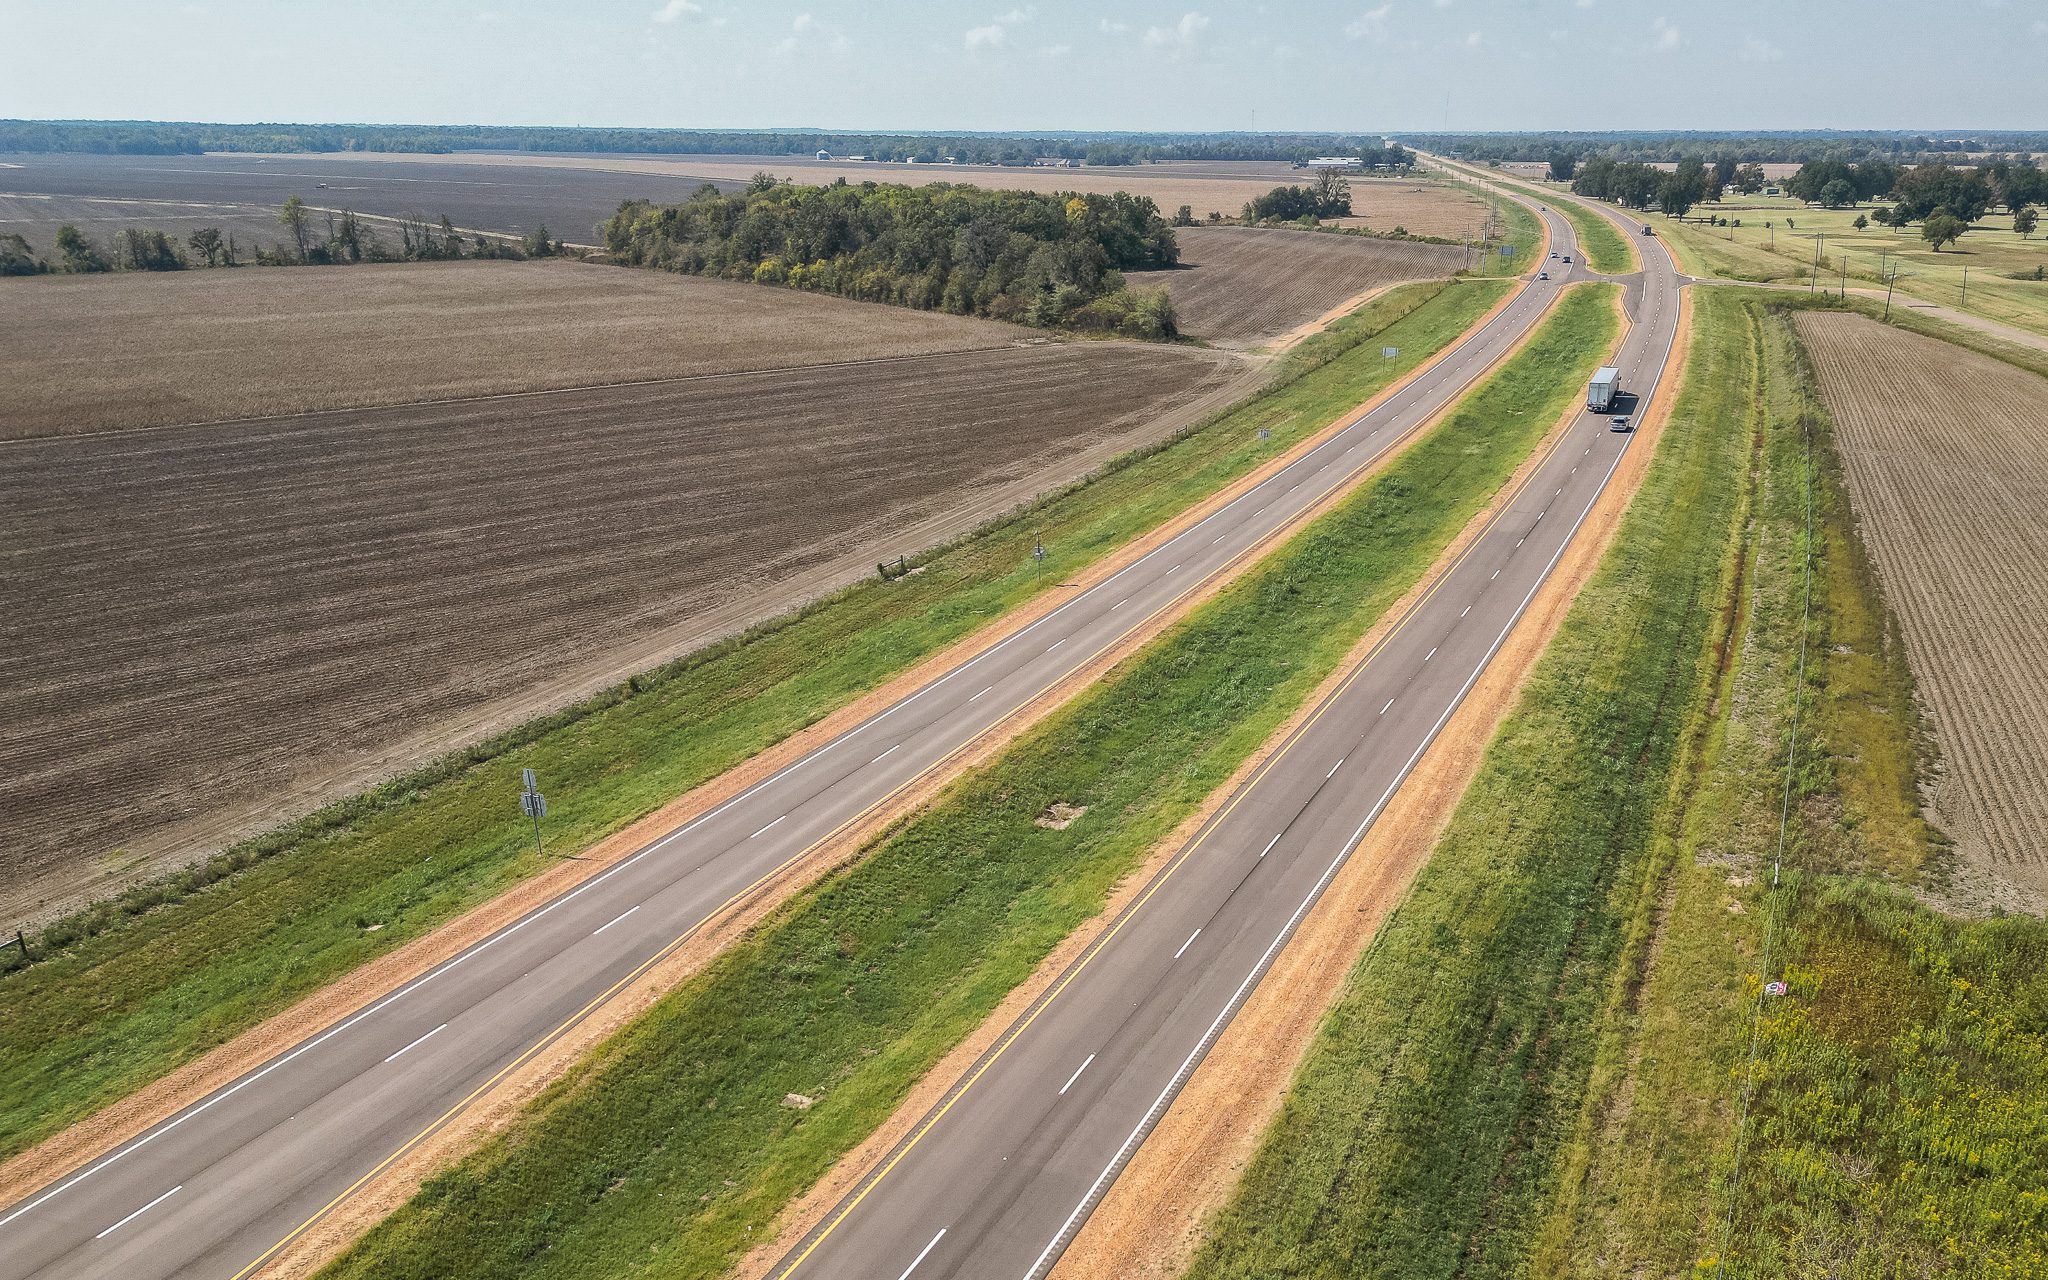 US 61/49 Bypass in Clarksdale, MS, awarded Quality in Construction Award.